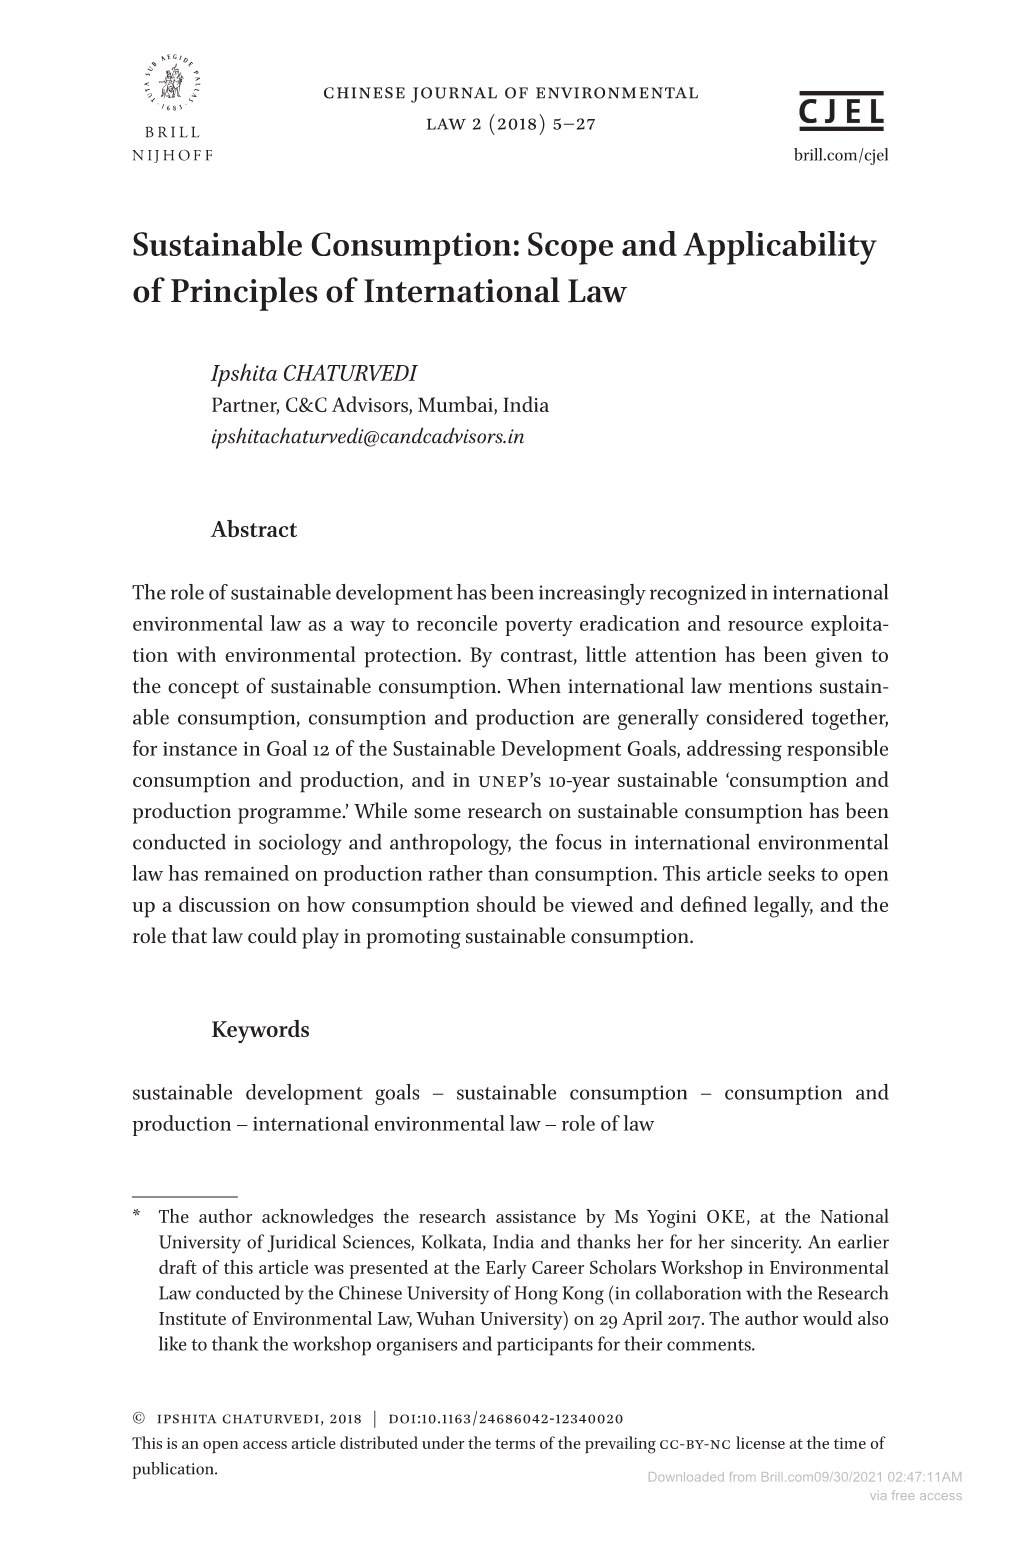 Sustainable Consumption: Scope and Applicability of Principles of International Law